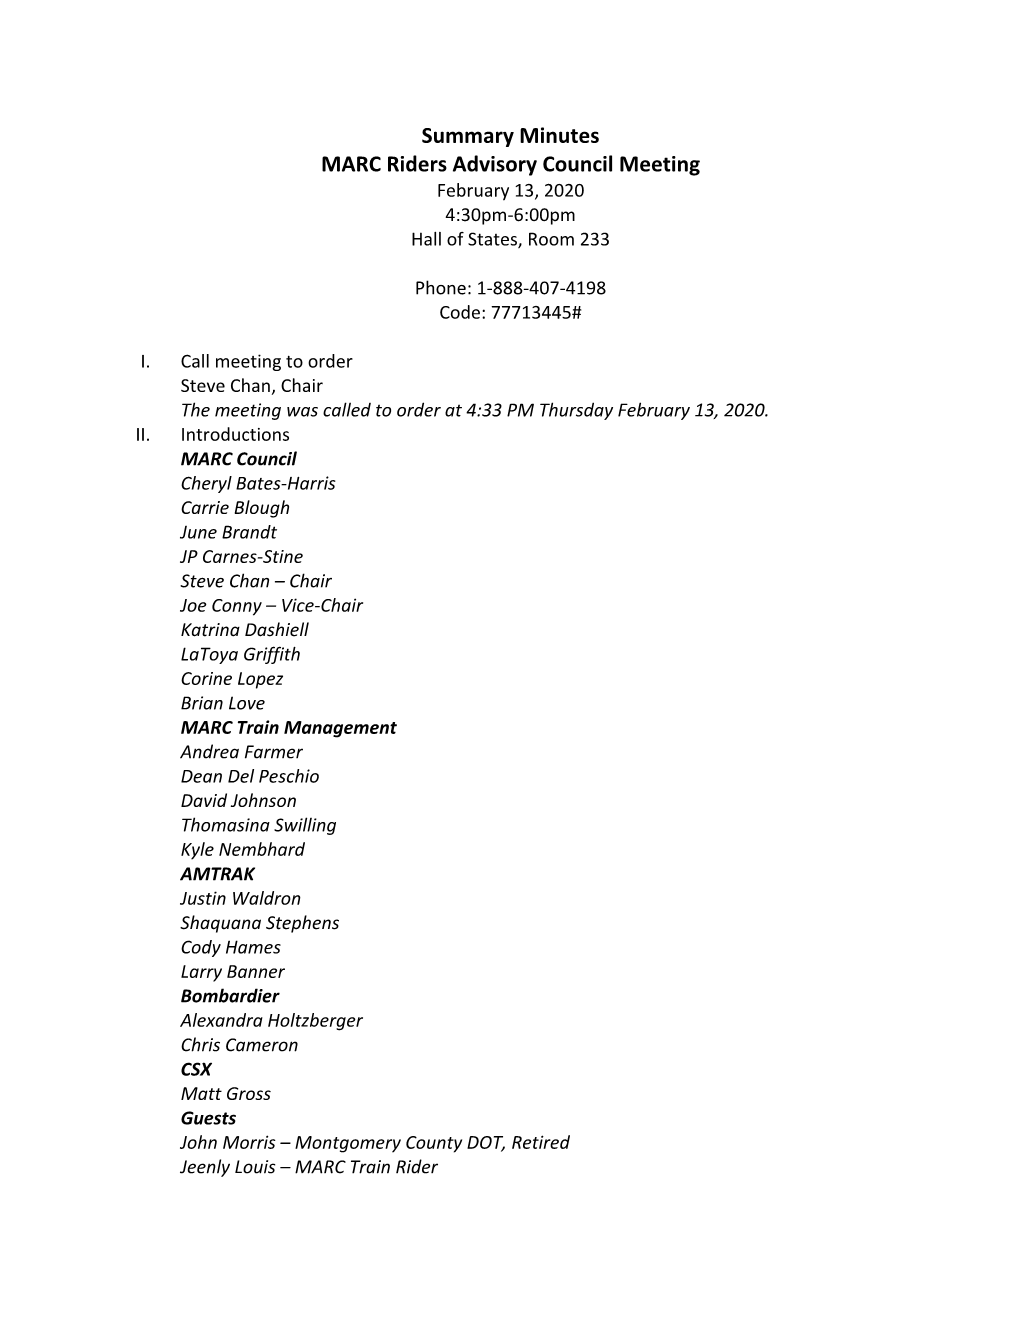 Summary Minutes MARC Riders Advisory Council Meeting February 13, 2020 4:30Pm‐6:00Pm Hall of States, Room 233